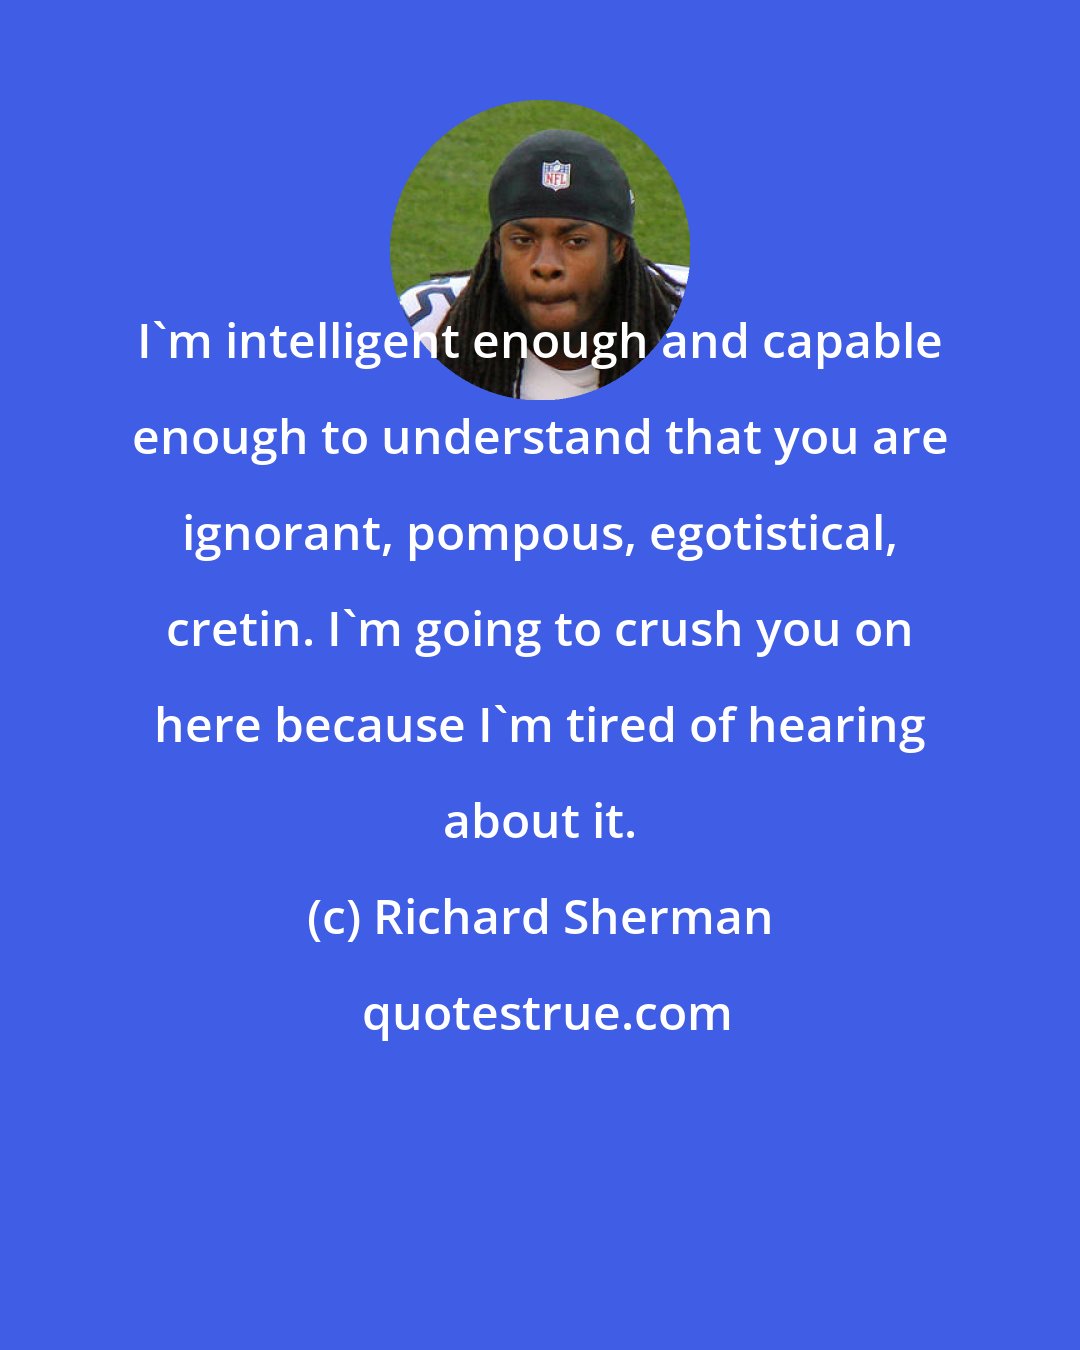 Richard Sherman: I'm intelligent enough and capable enough to understand that you are ignorant, pompous, egotistical, cretin. I'm going to crush you on here because I'm tired of hearing about it.